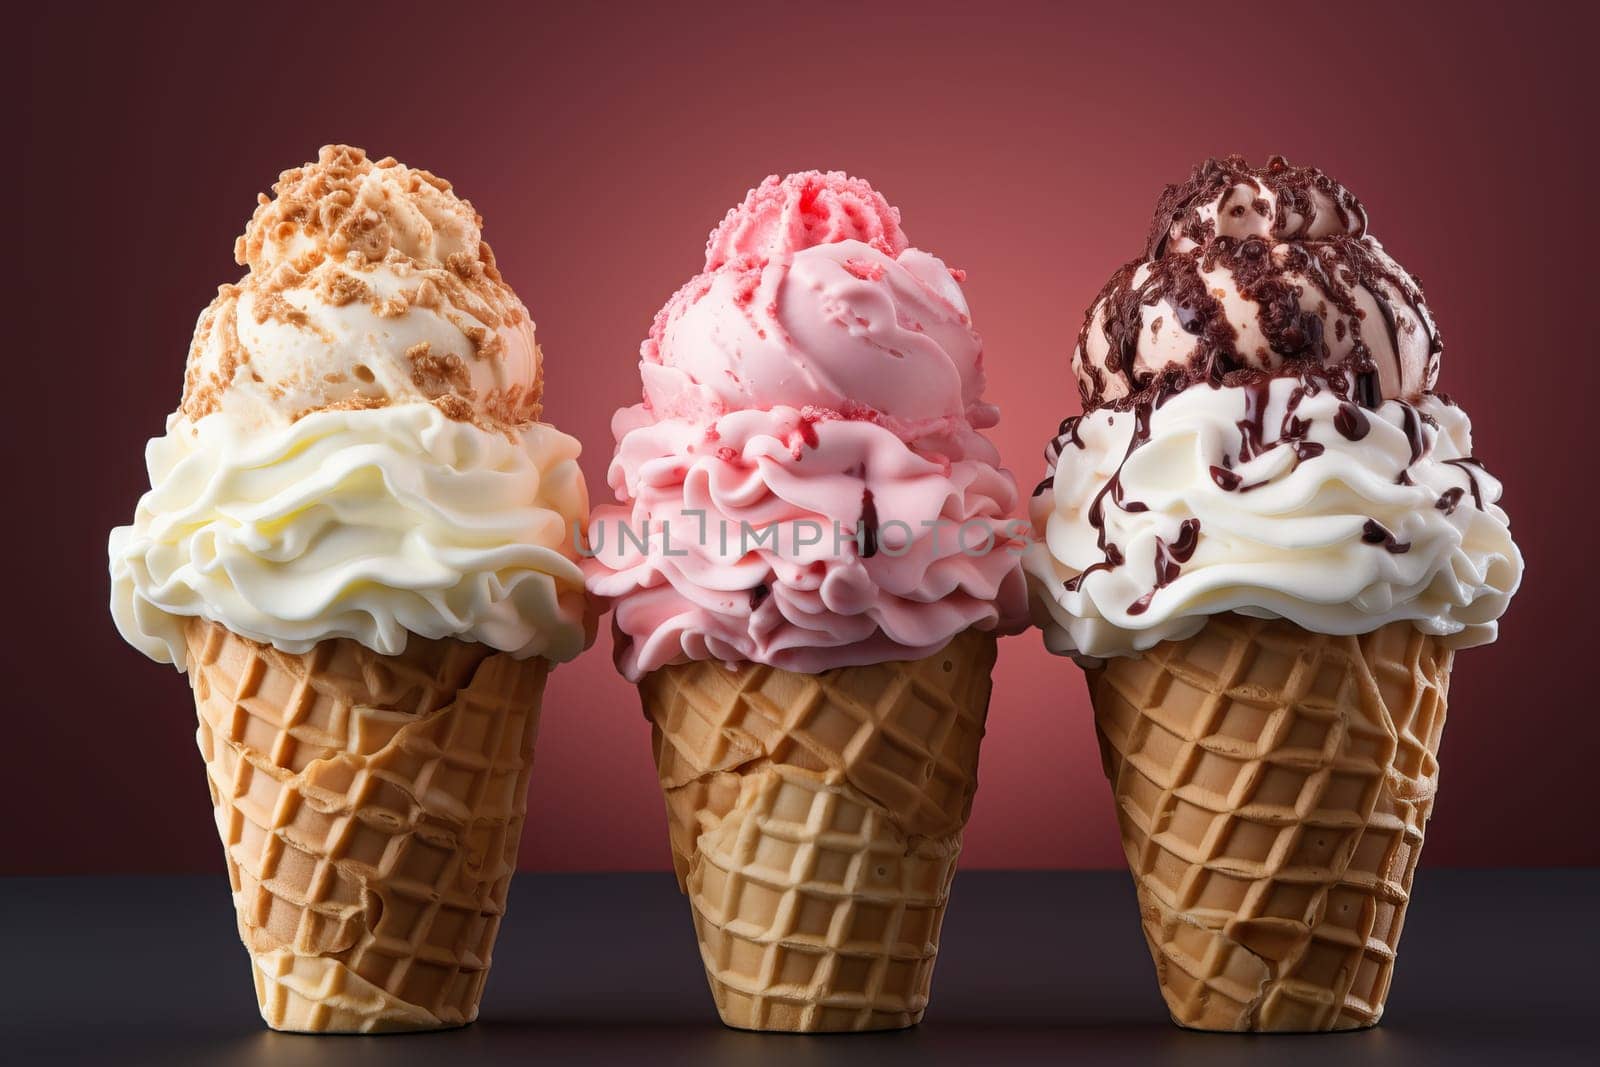 Three ice creams with three different flavors of strawberry, vanilla and banana on a bright background. by Niko_Cingaryuk